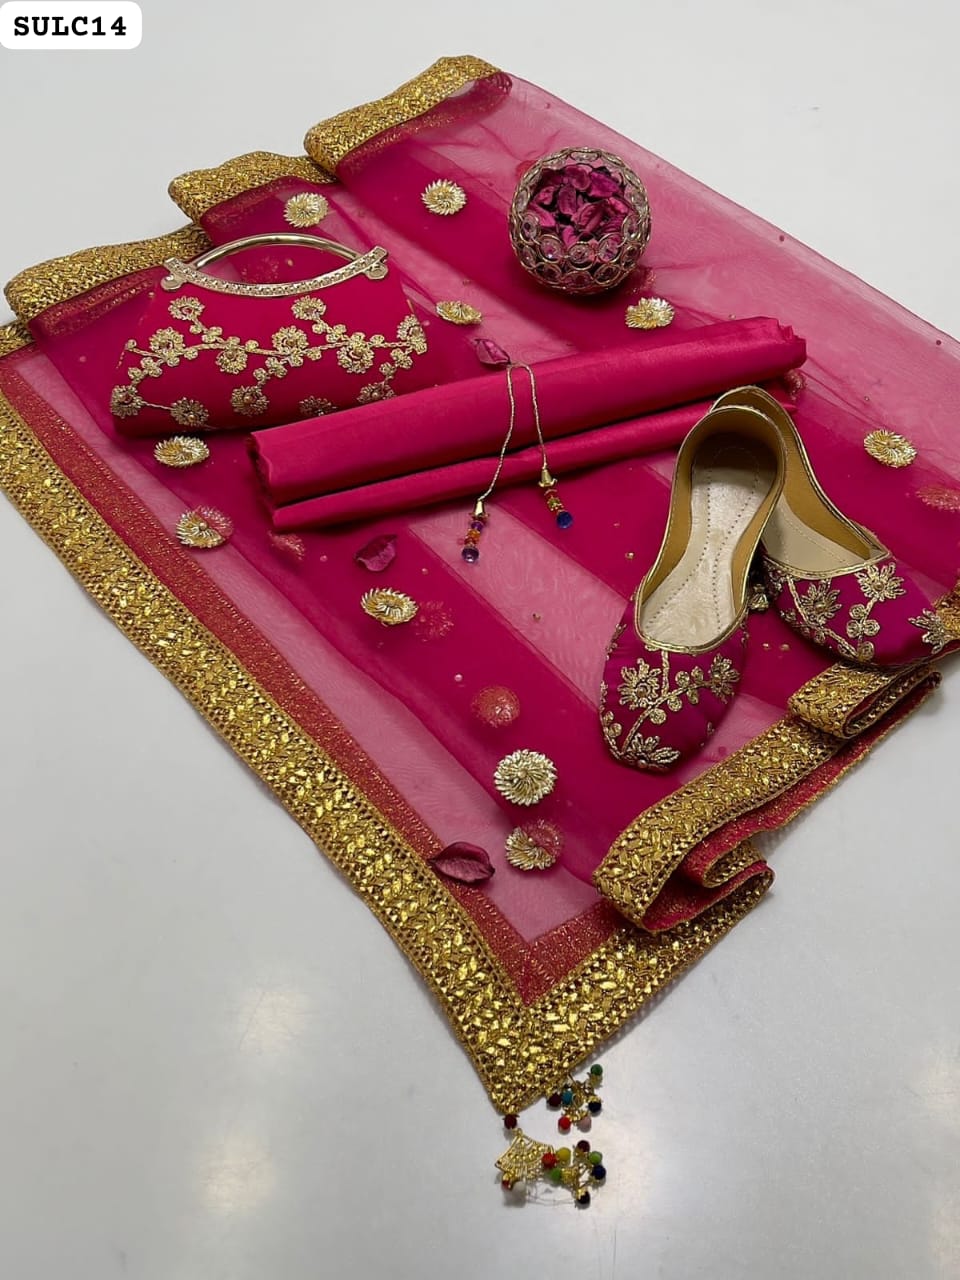 Plain Katan Silk Fabric Shirt And Trouser With Indian Net Hand Stitched Gotta Flower Embroidery And kundan Chatta Work Dupatta With 4 side border and tussles